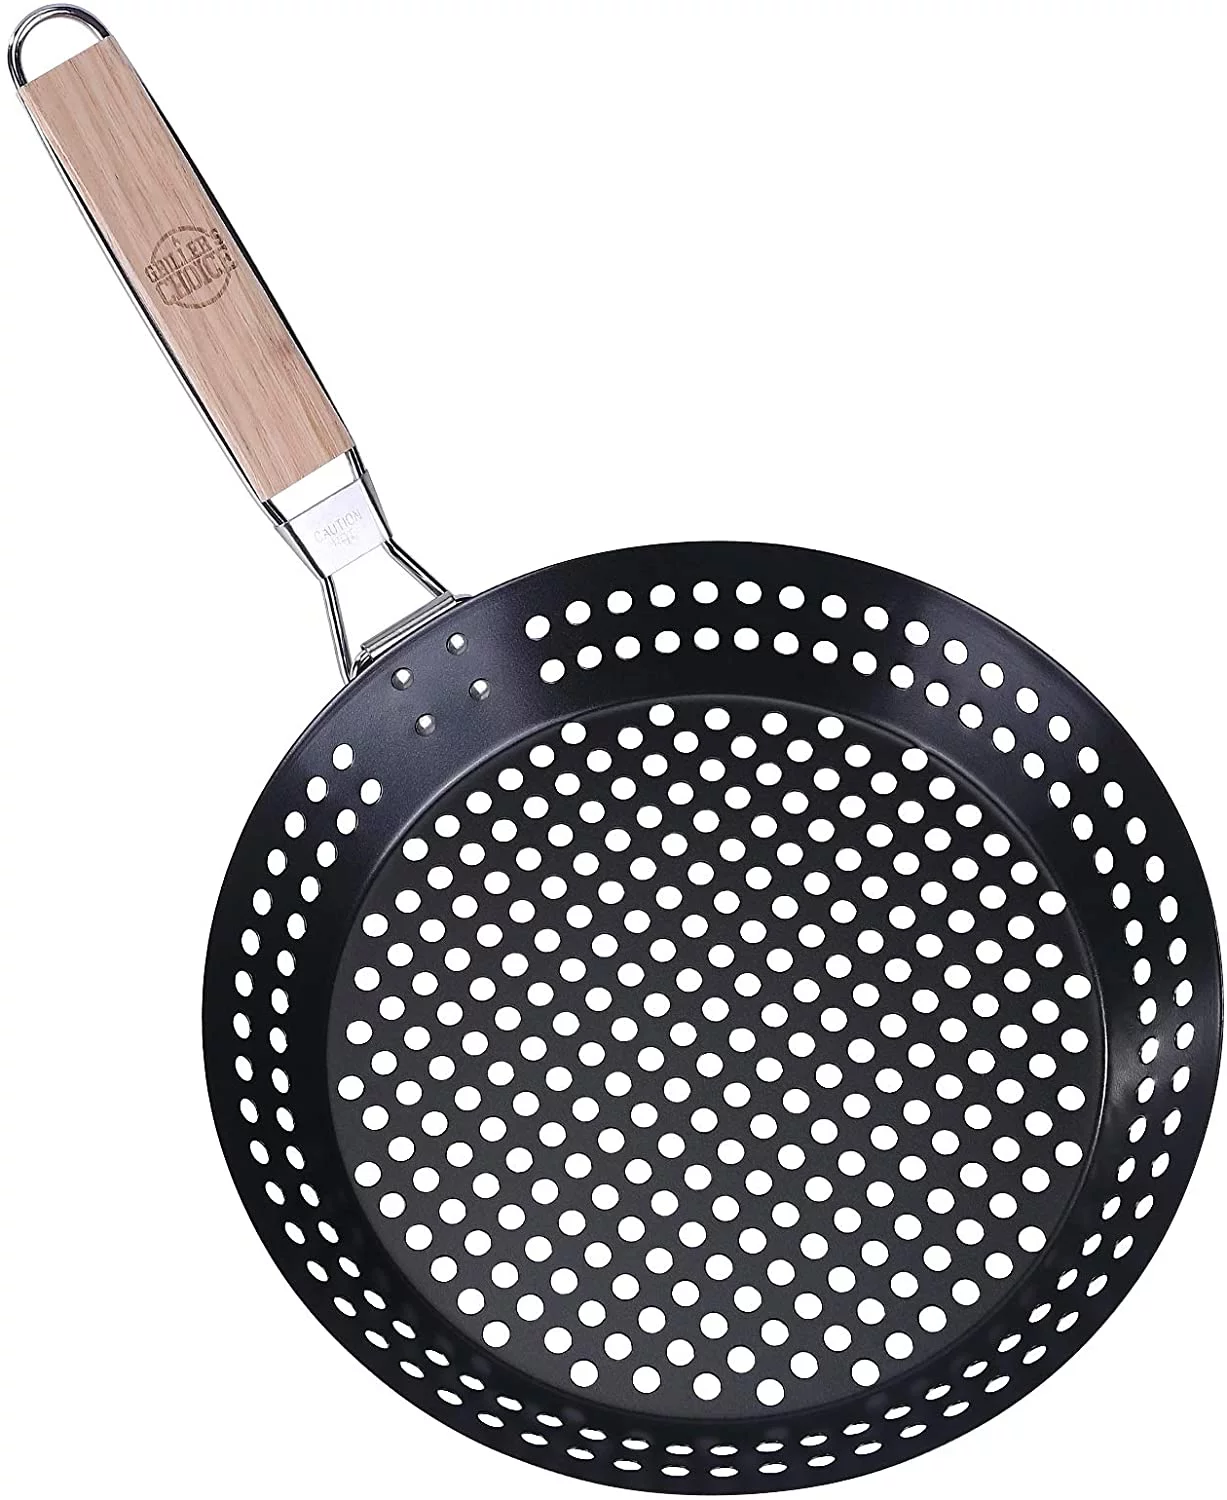 Griller's Choice Grill Basket - Large Non-Stick Commercial Skillet With Handle For Outdoor Grilling